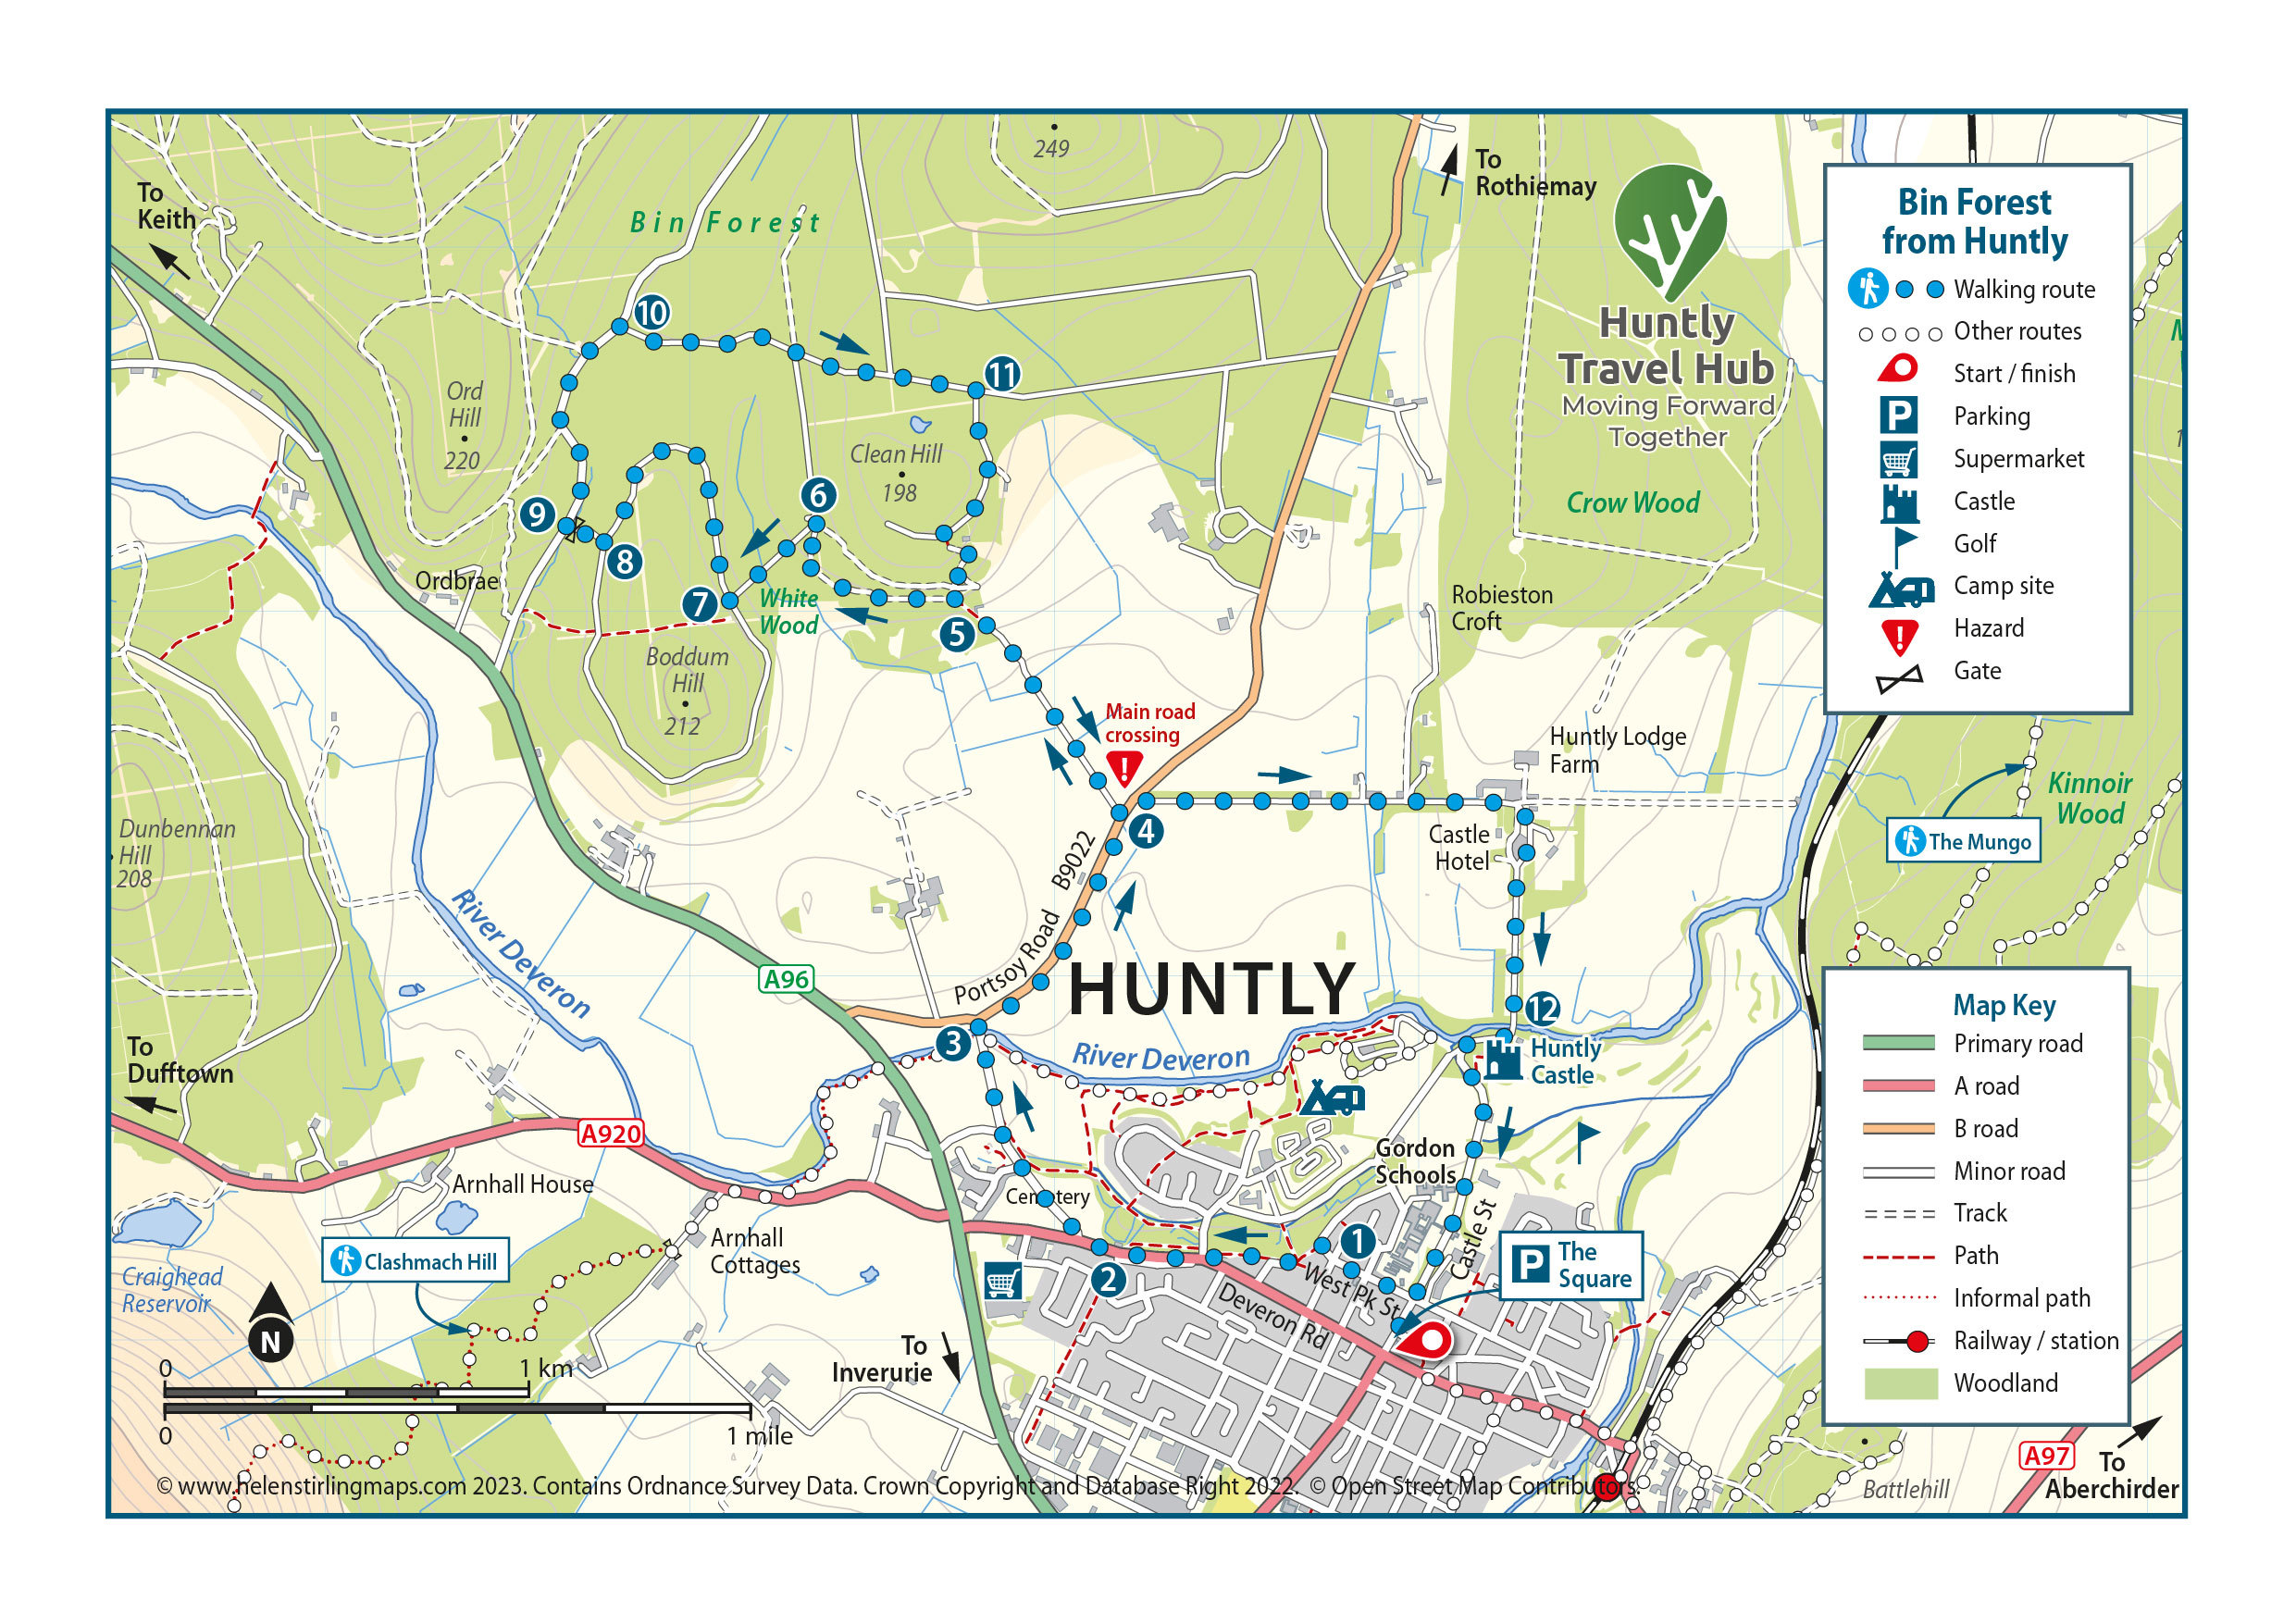 Bin Forest from Huntly Map